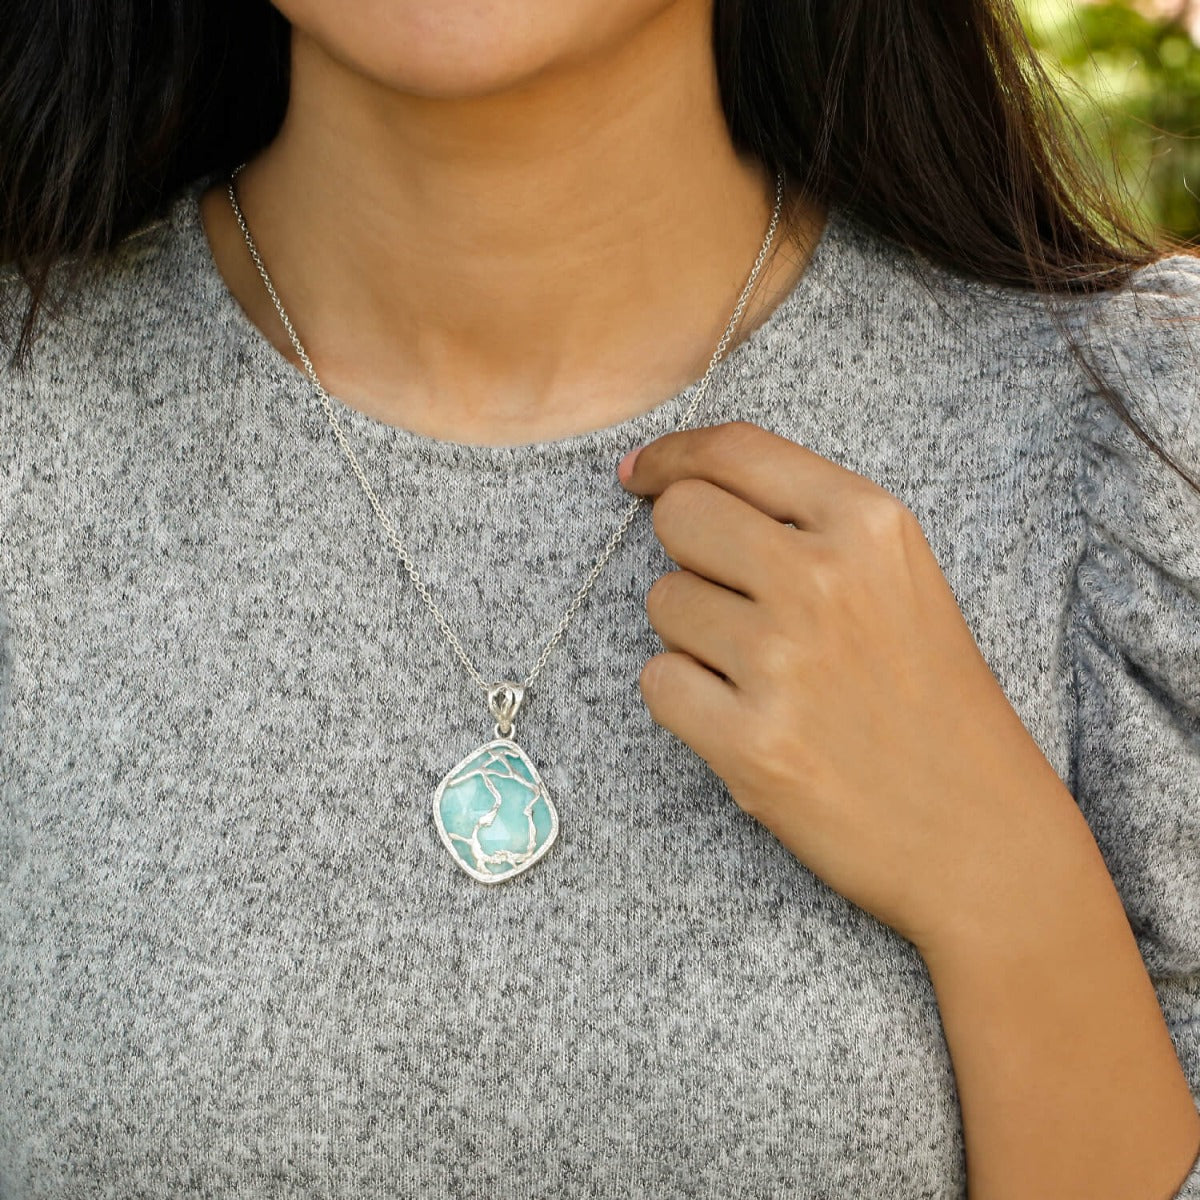 amazonite pendant, buy silver pendant, sterling silver pendant,  gemstone pendant, buy silver pendant, buy gemstone jewelry, buy jewelry online, amazonite jewelry, reticulated jewelry